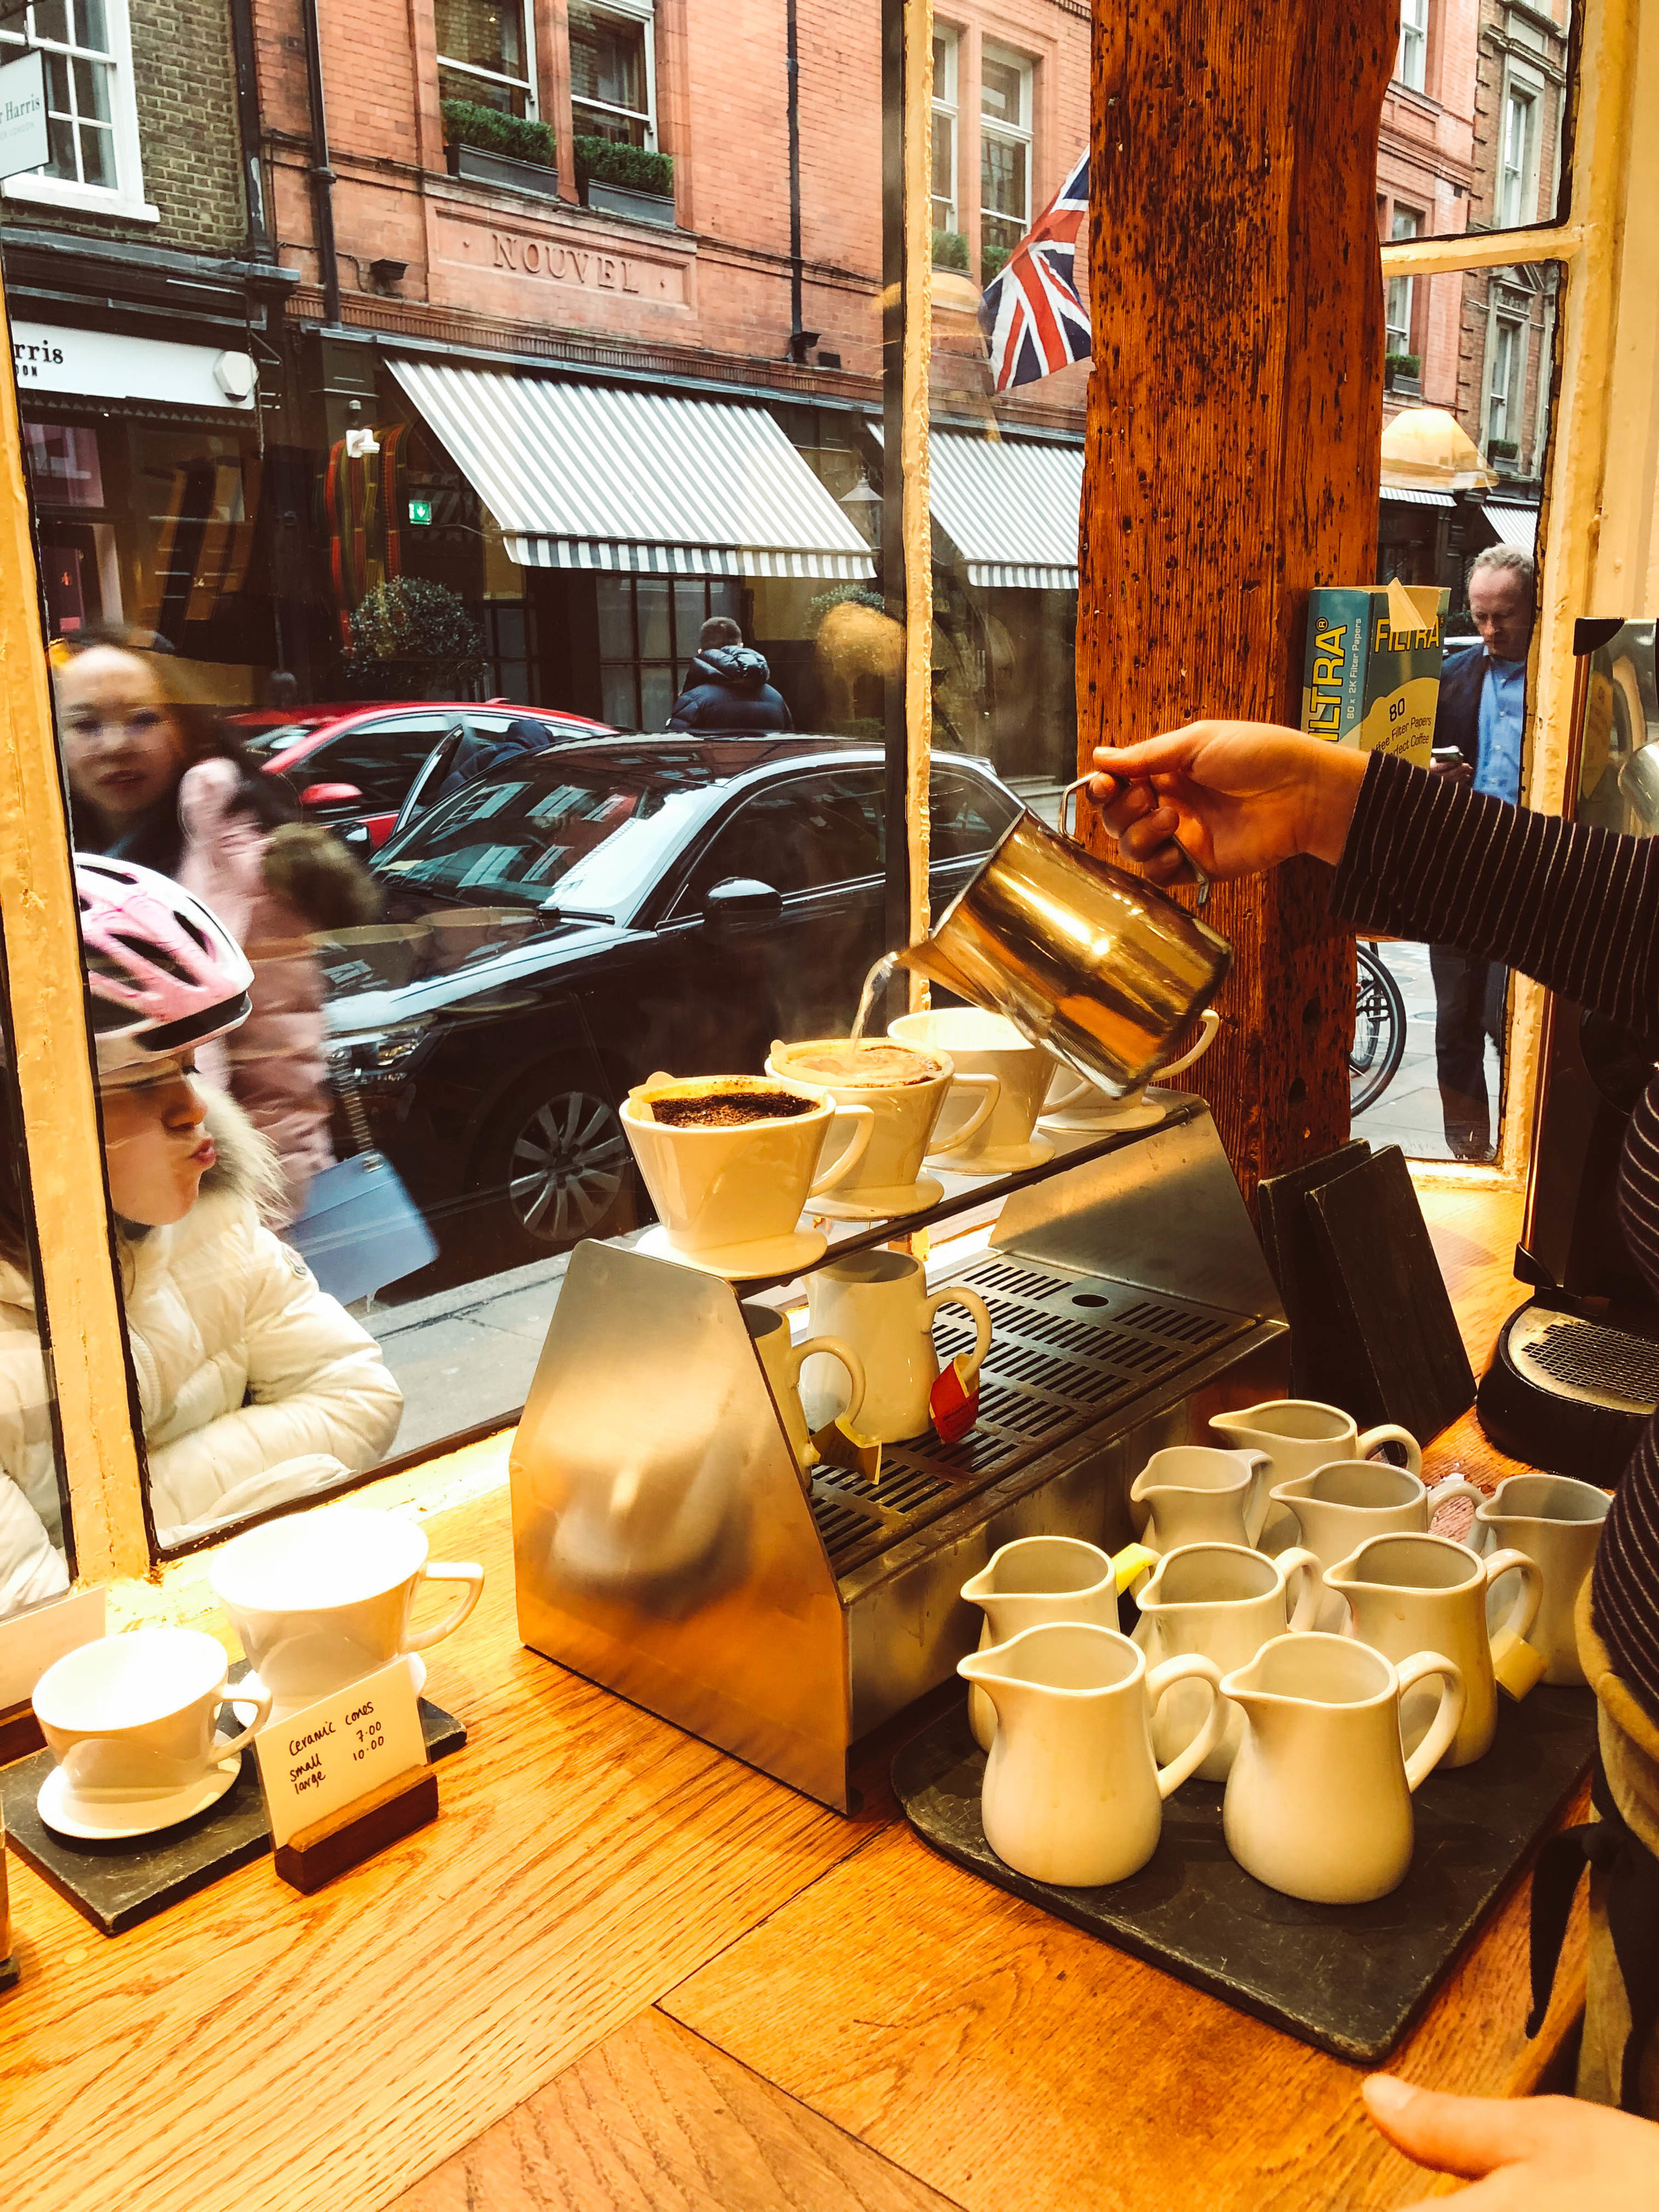 Monmouth Coffee London - pour over coffee being made in the window with pitchers of samples below